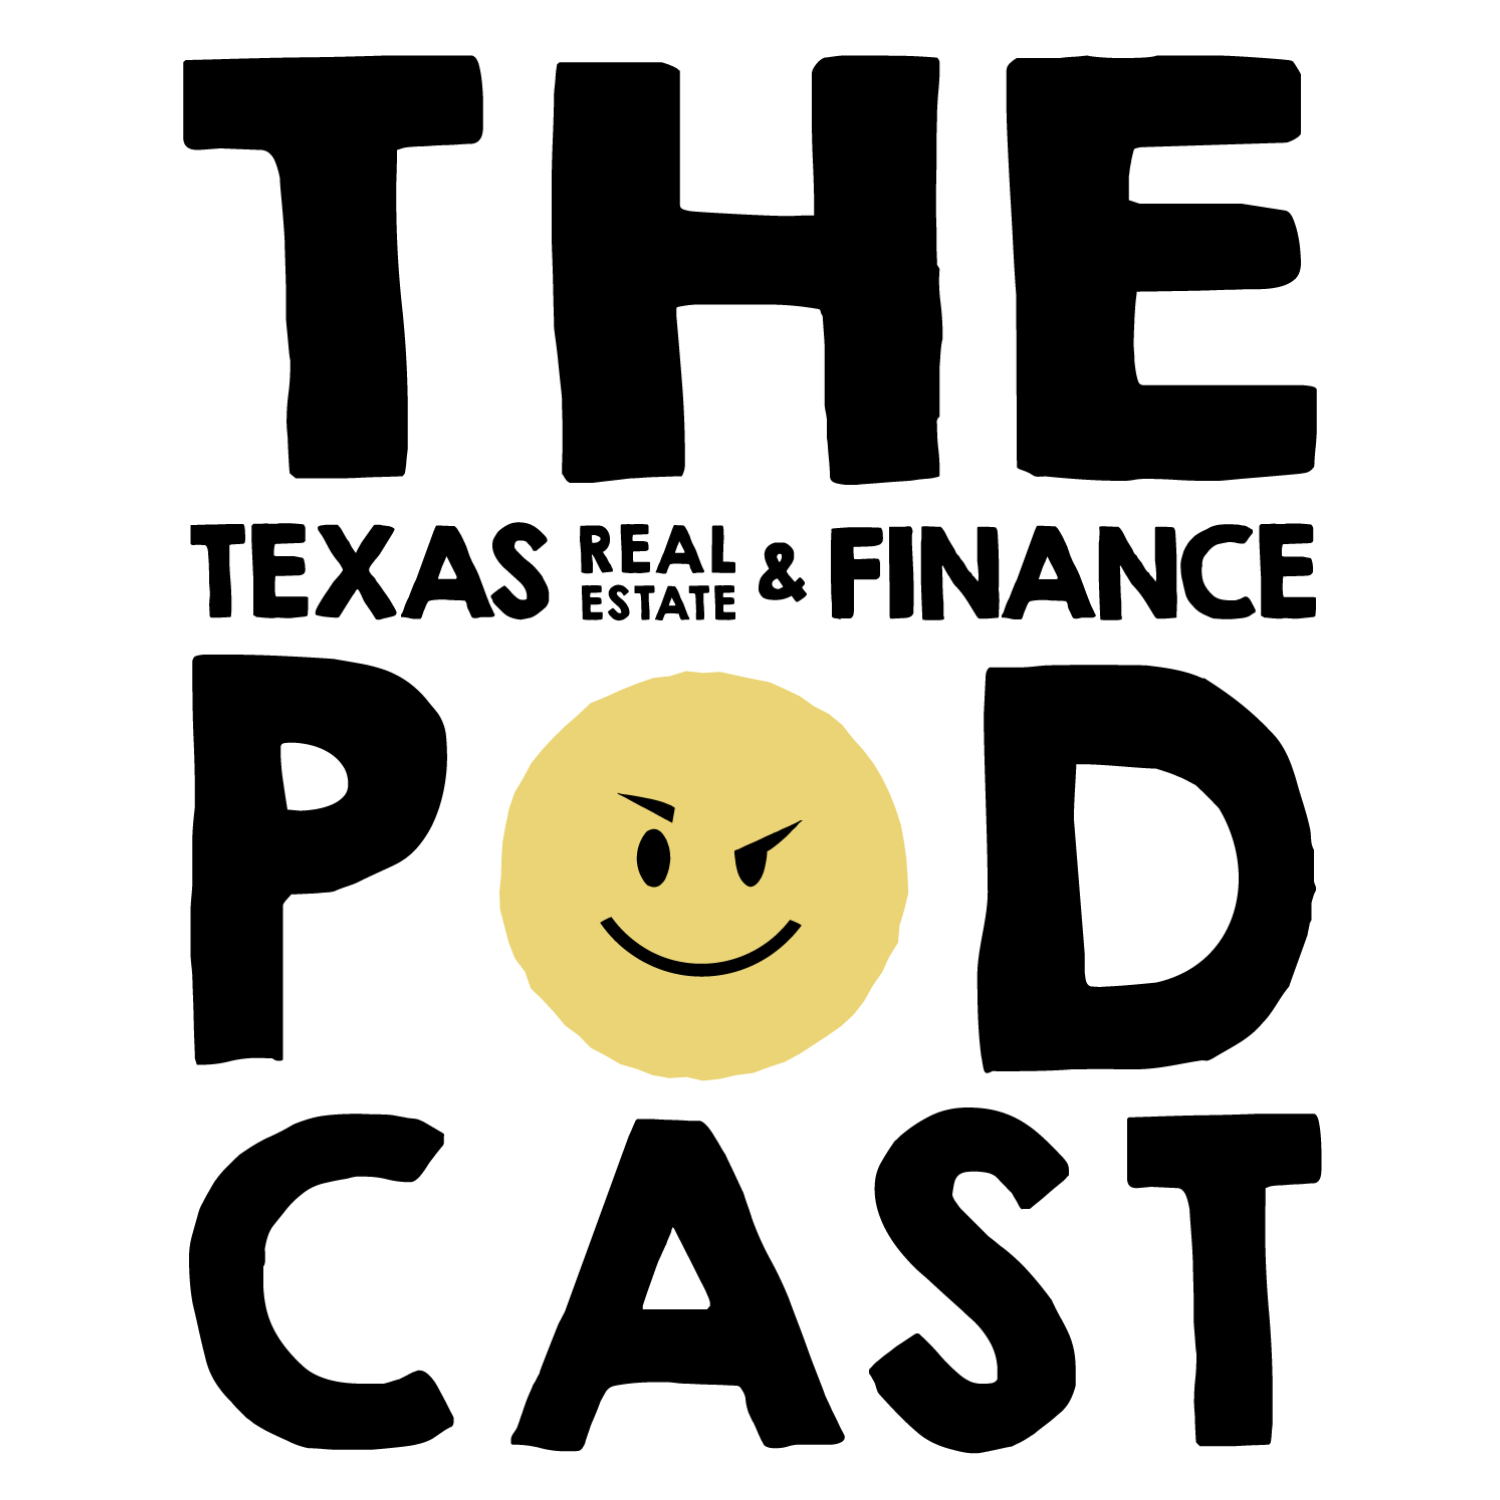 Artwork for The Texas Real Estate & Finance Podcast with Mike Mills